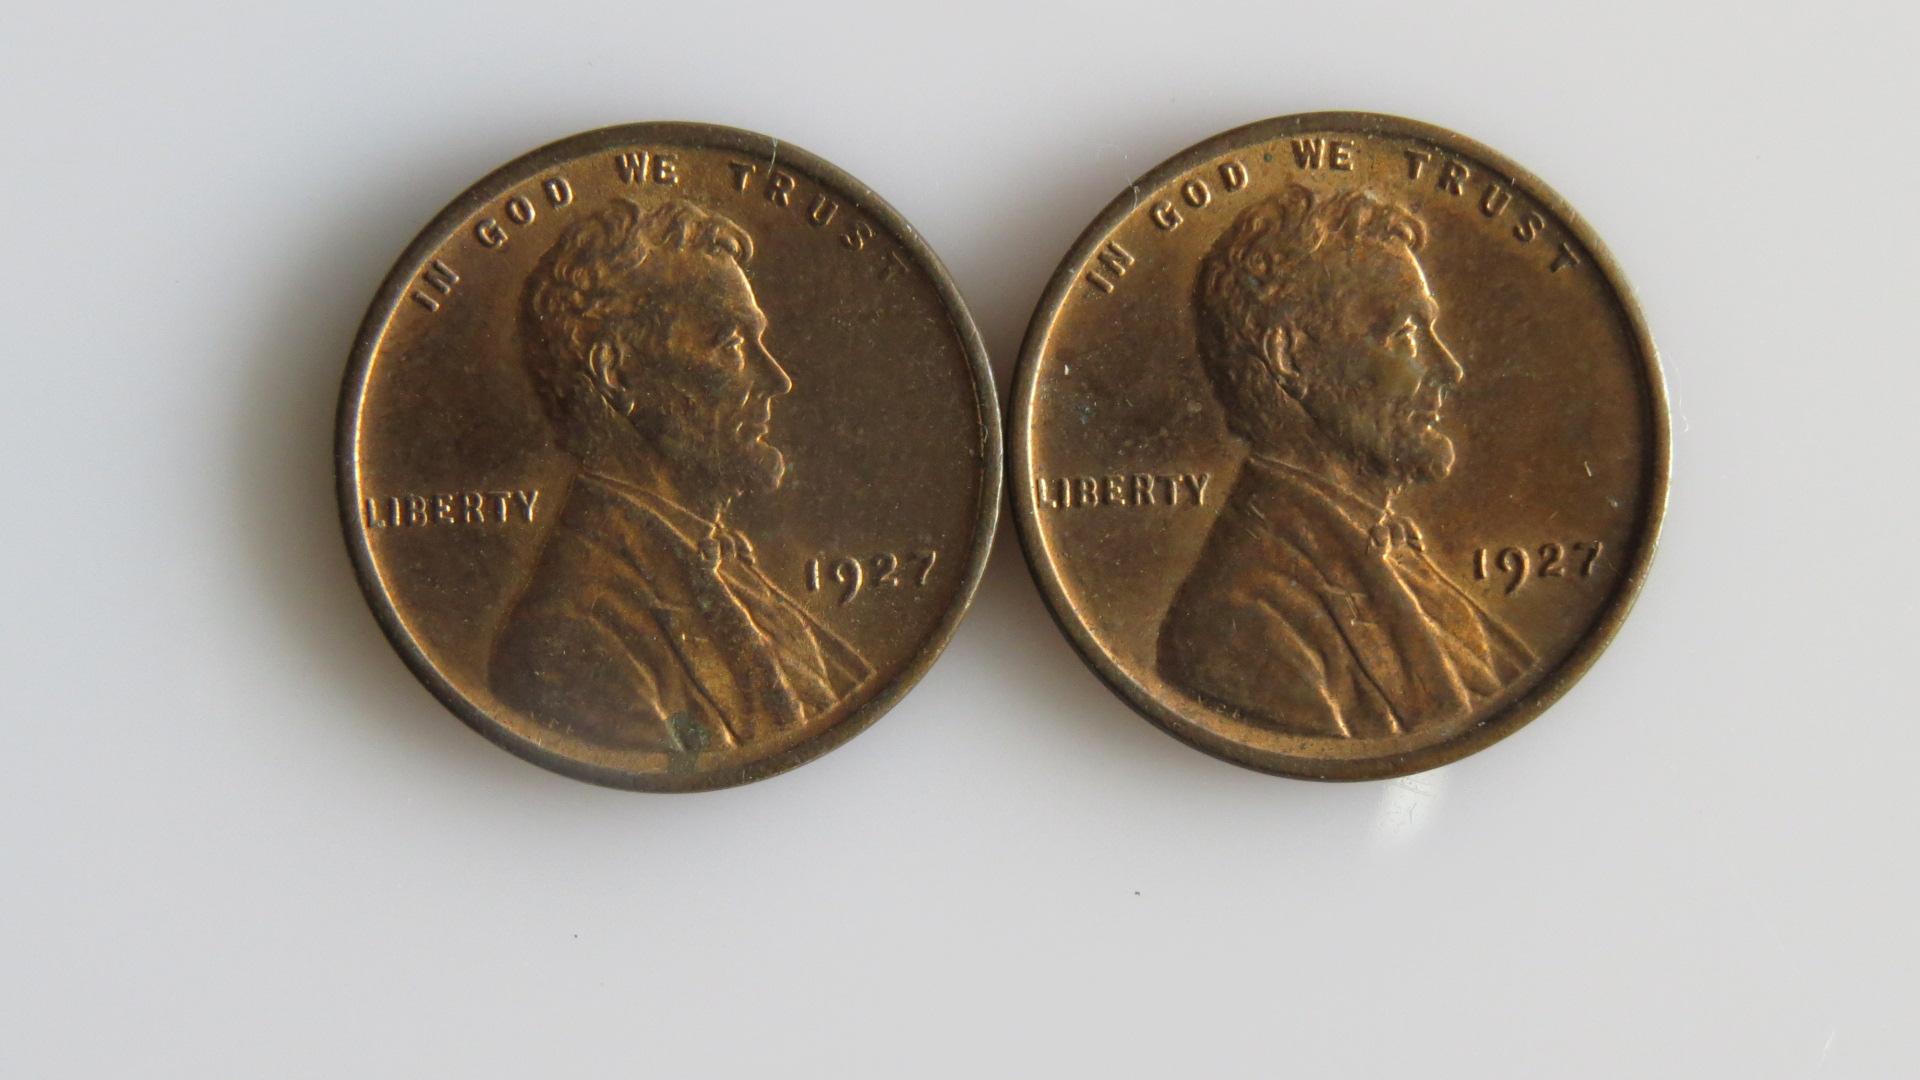 A Pair of Uncirculated 1927 Lincoln Cents